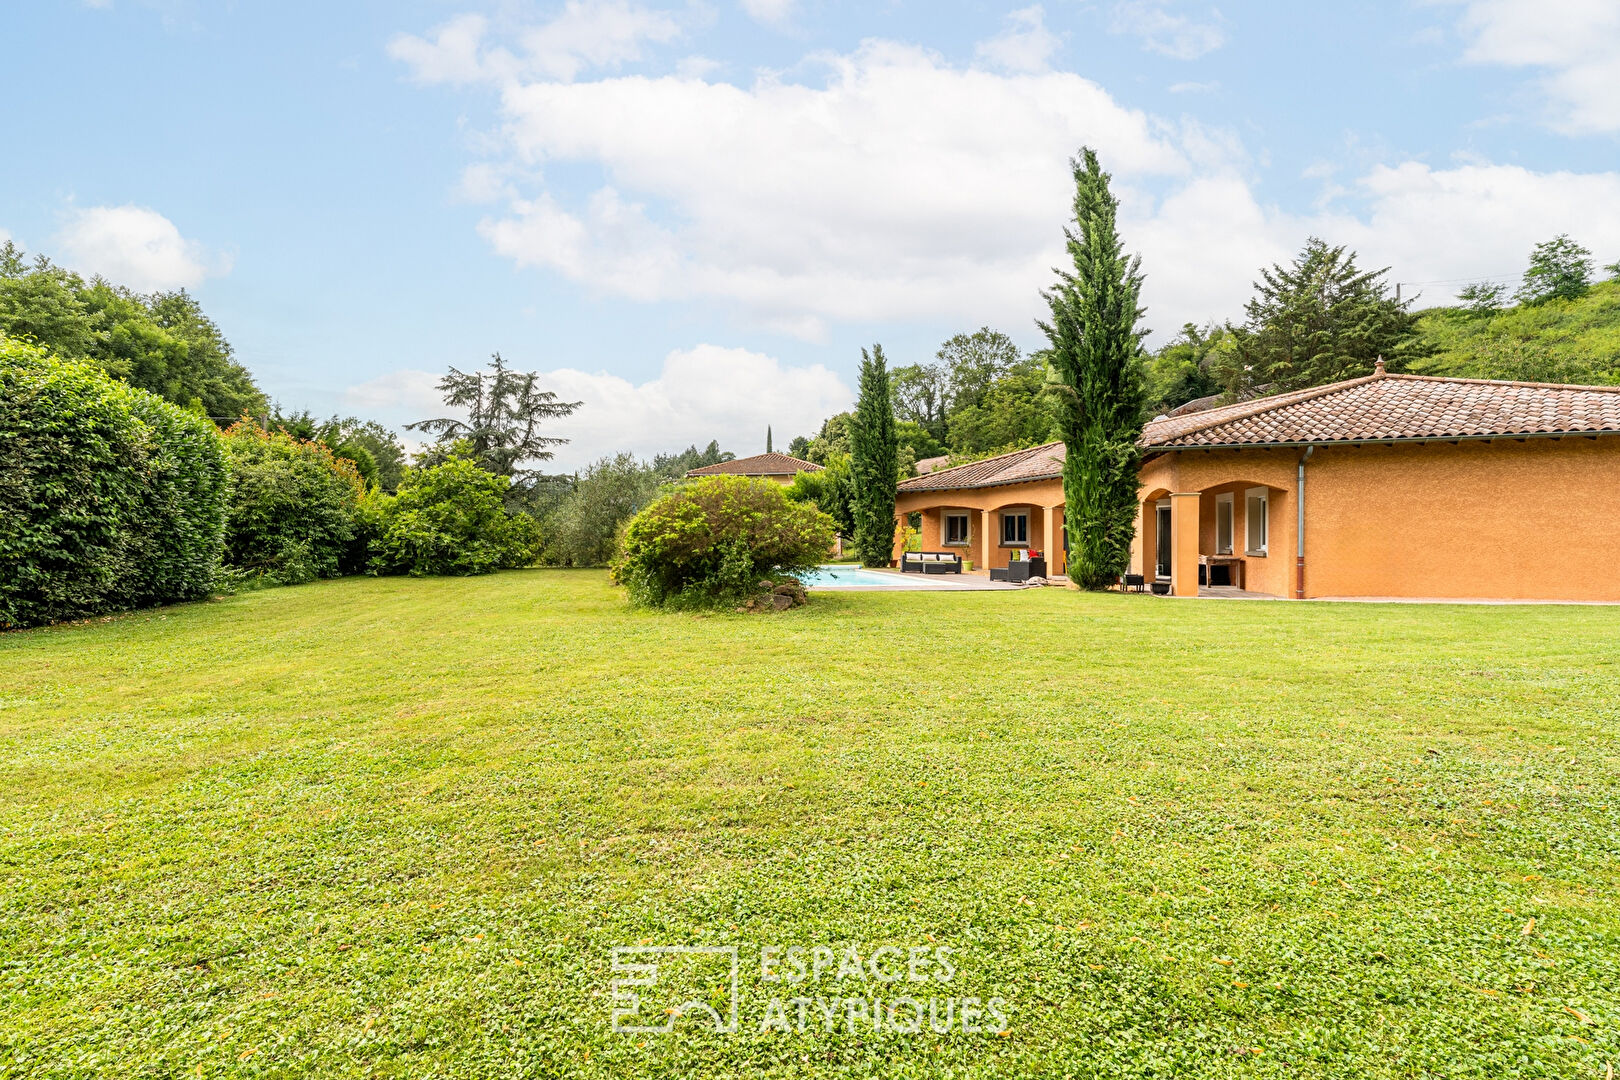 Single-storey villa with swimming pool in the heart of Beaujolais